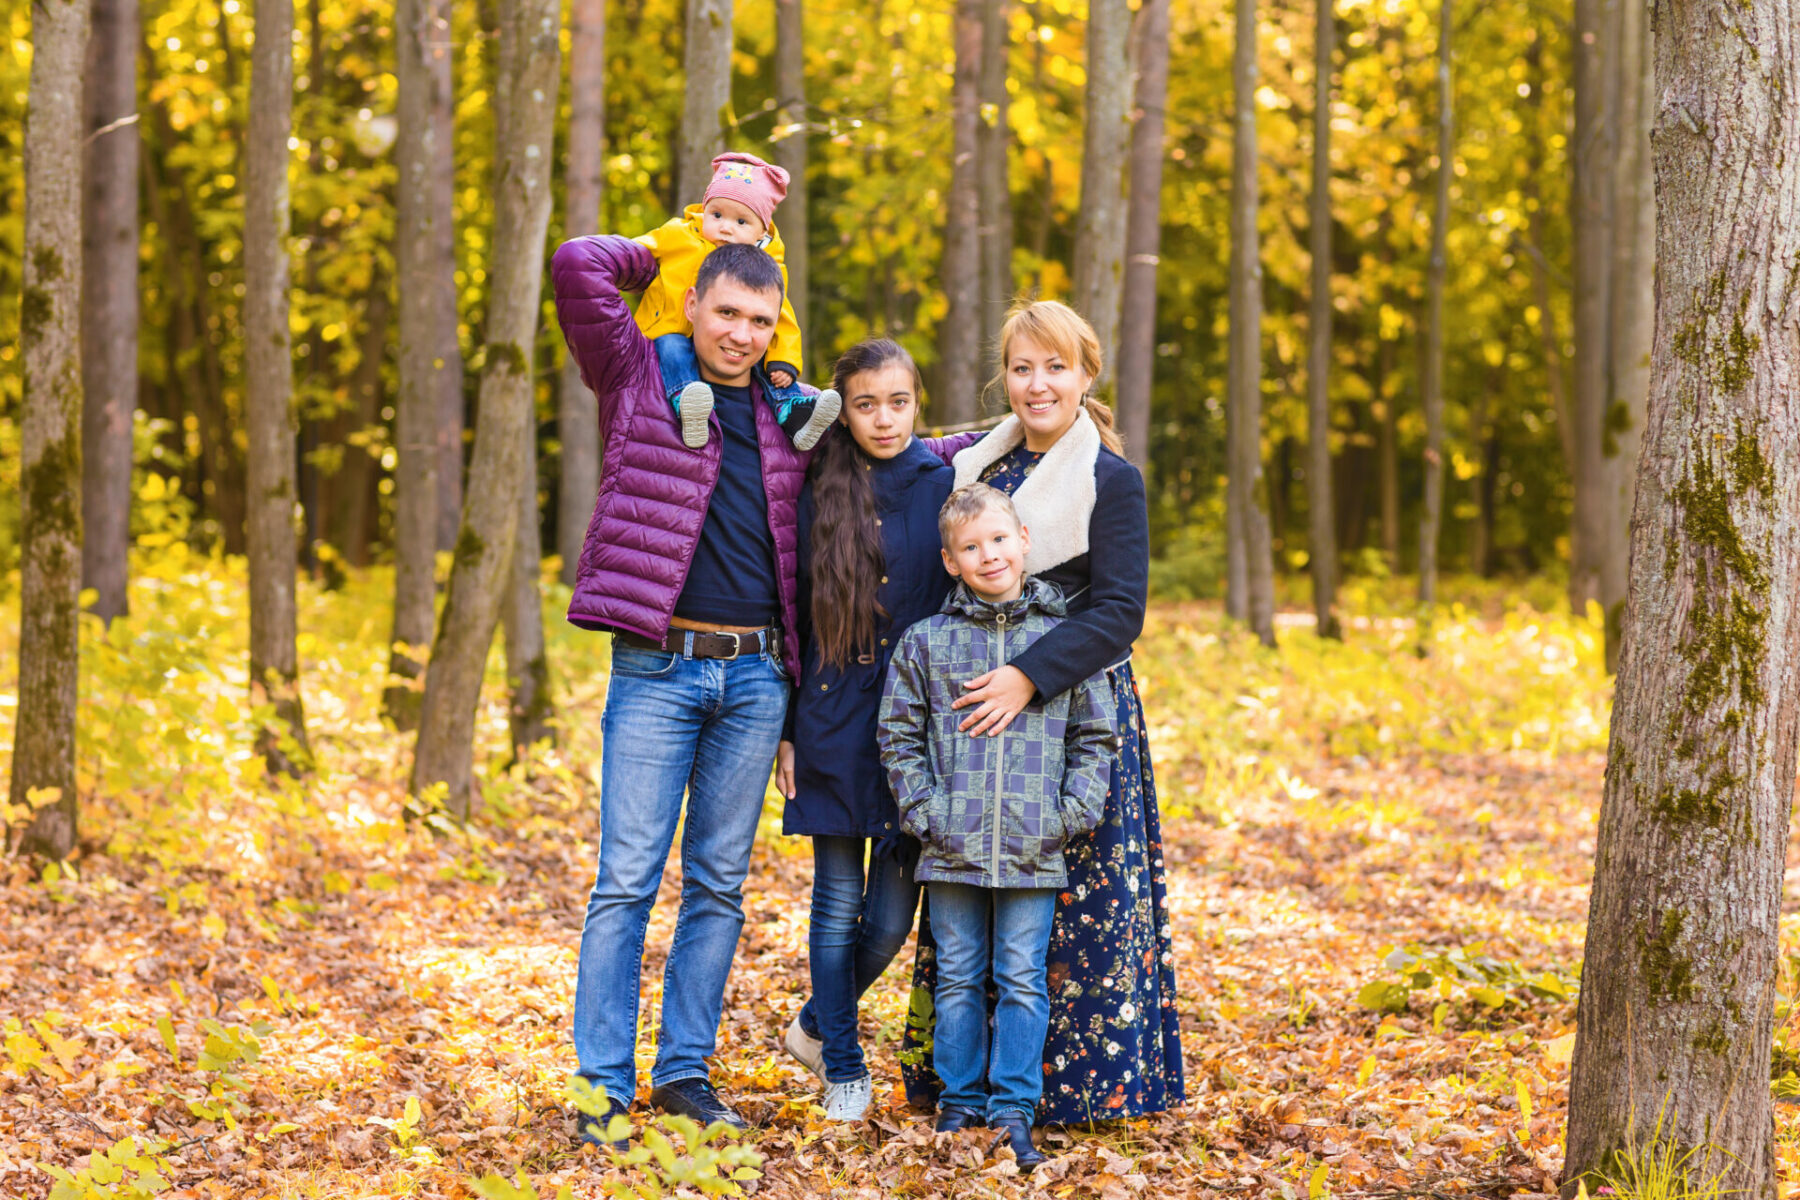 Family Group Relaxing Outdoors In Autumn Landscape